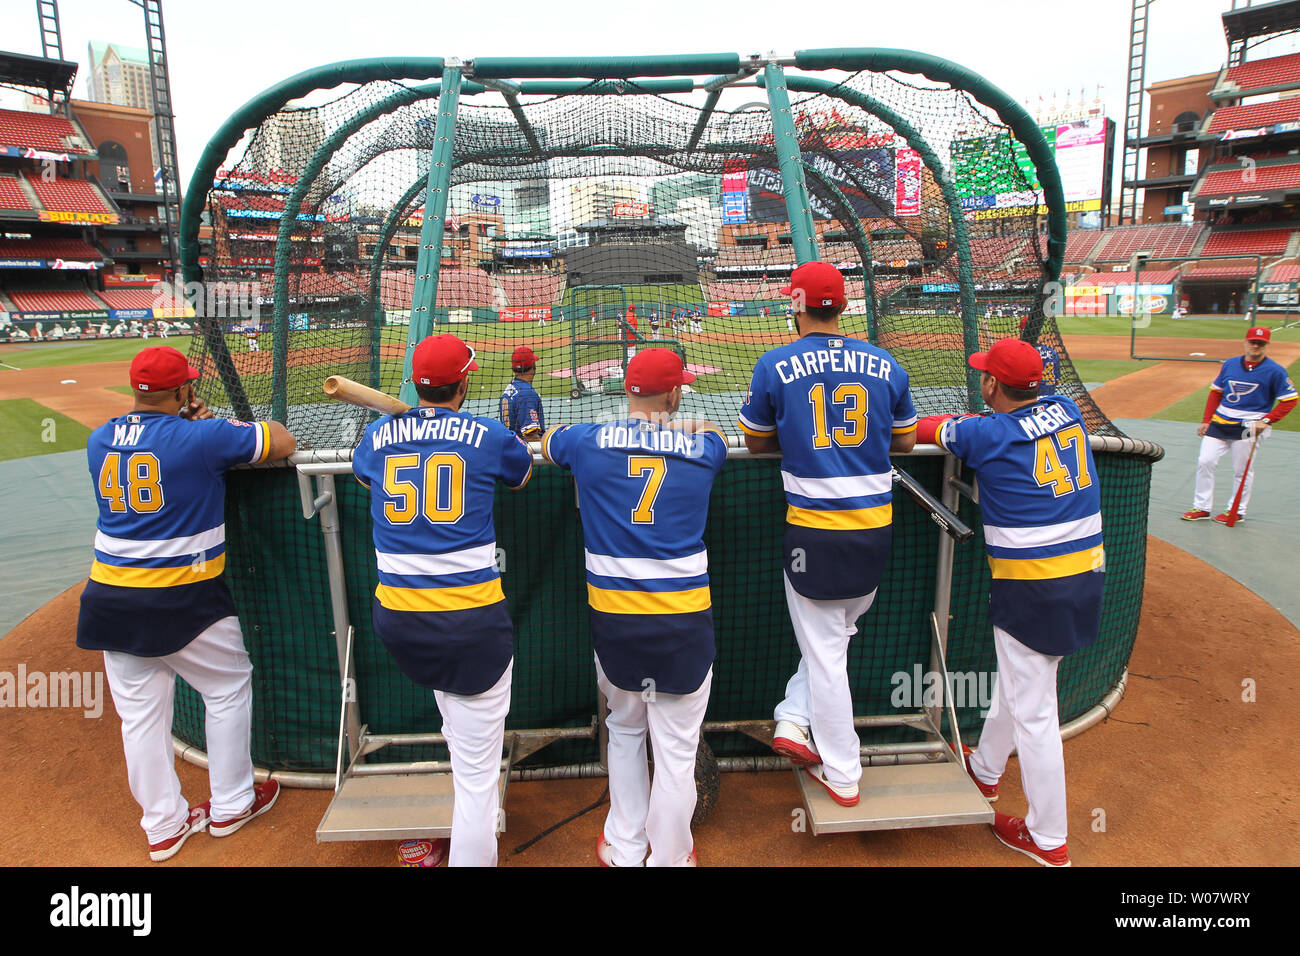 St. Louis Cardinals players and coaches watch batting practice